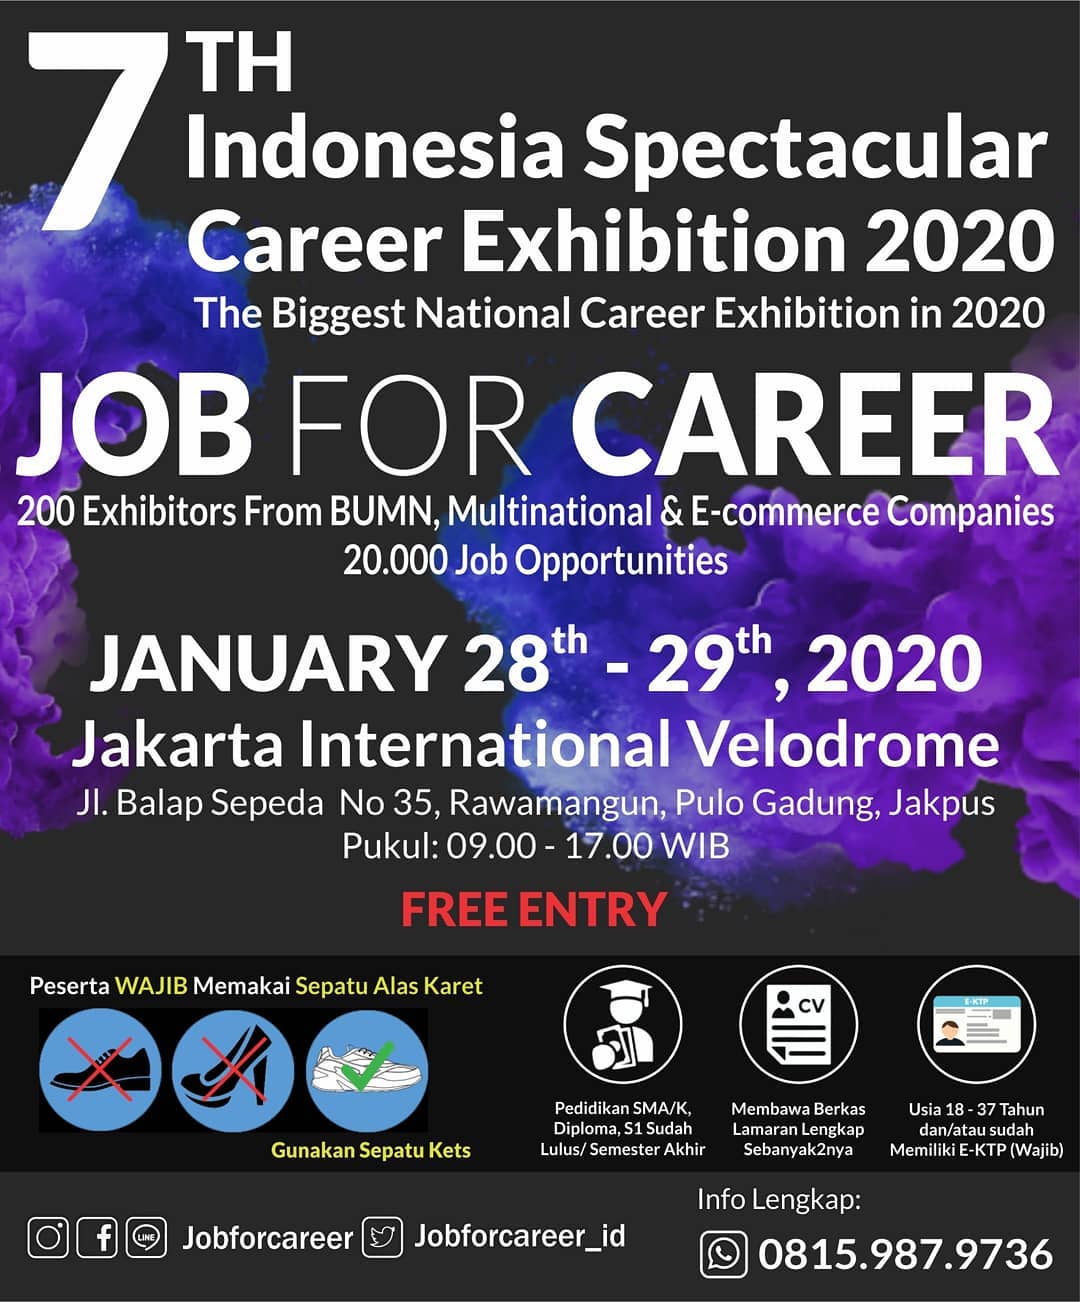 The 7Th Indonesia Spectacular Startup & Career Exhibition “JOB FOR CAREER”